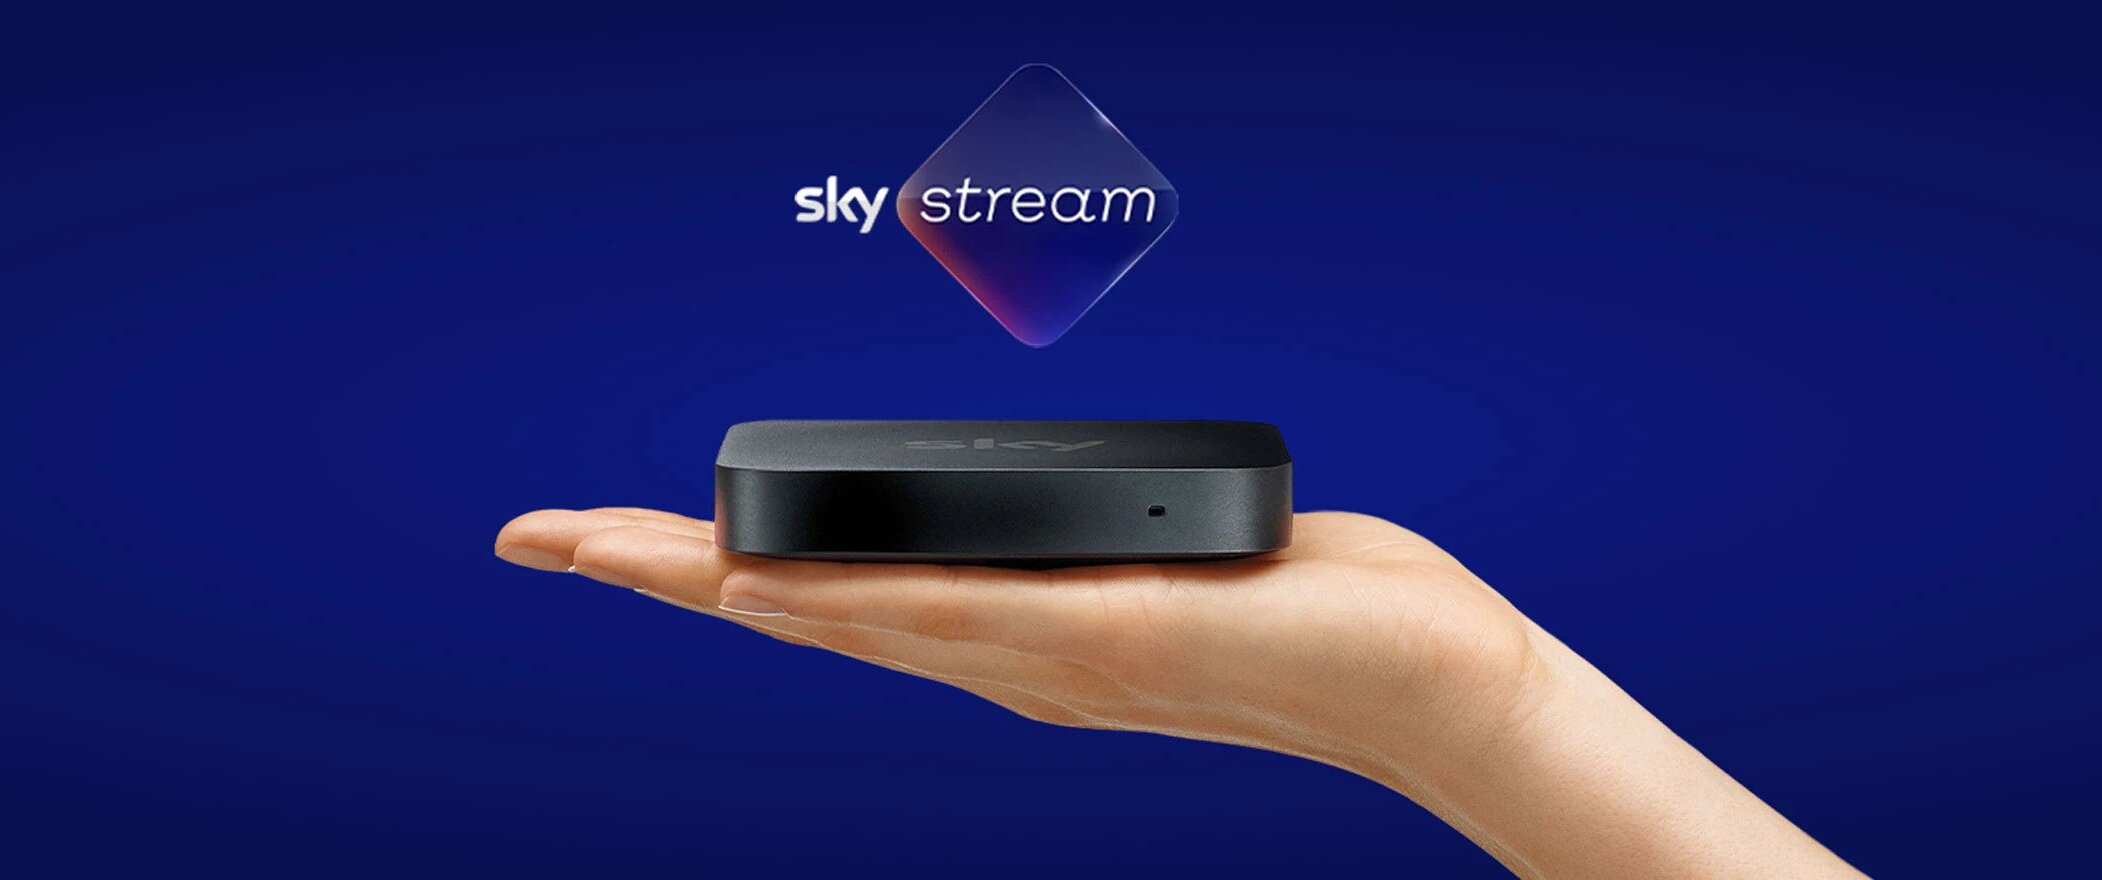 Sky Stream: all you need to know